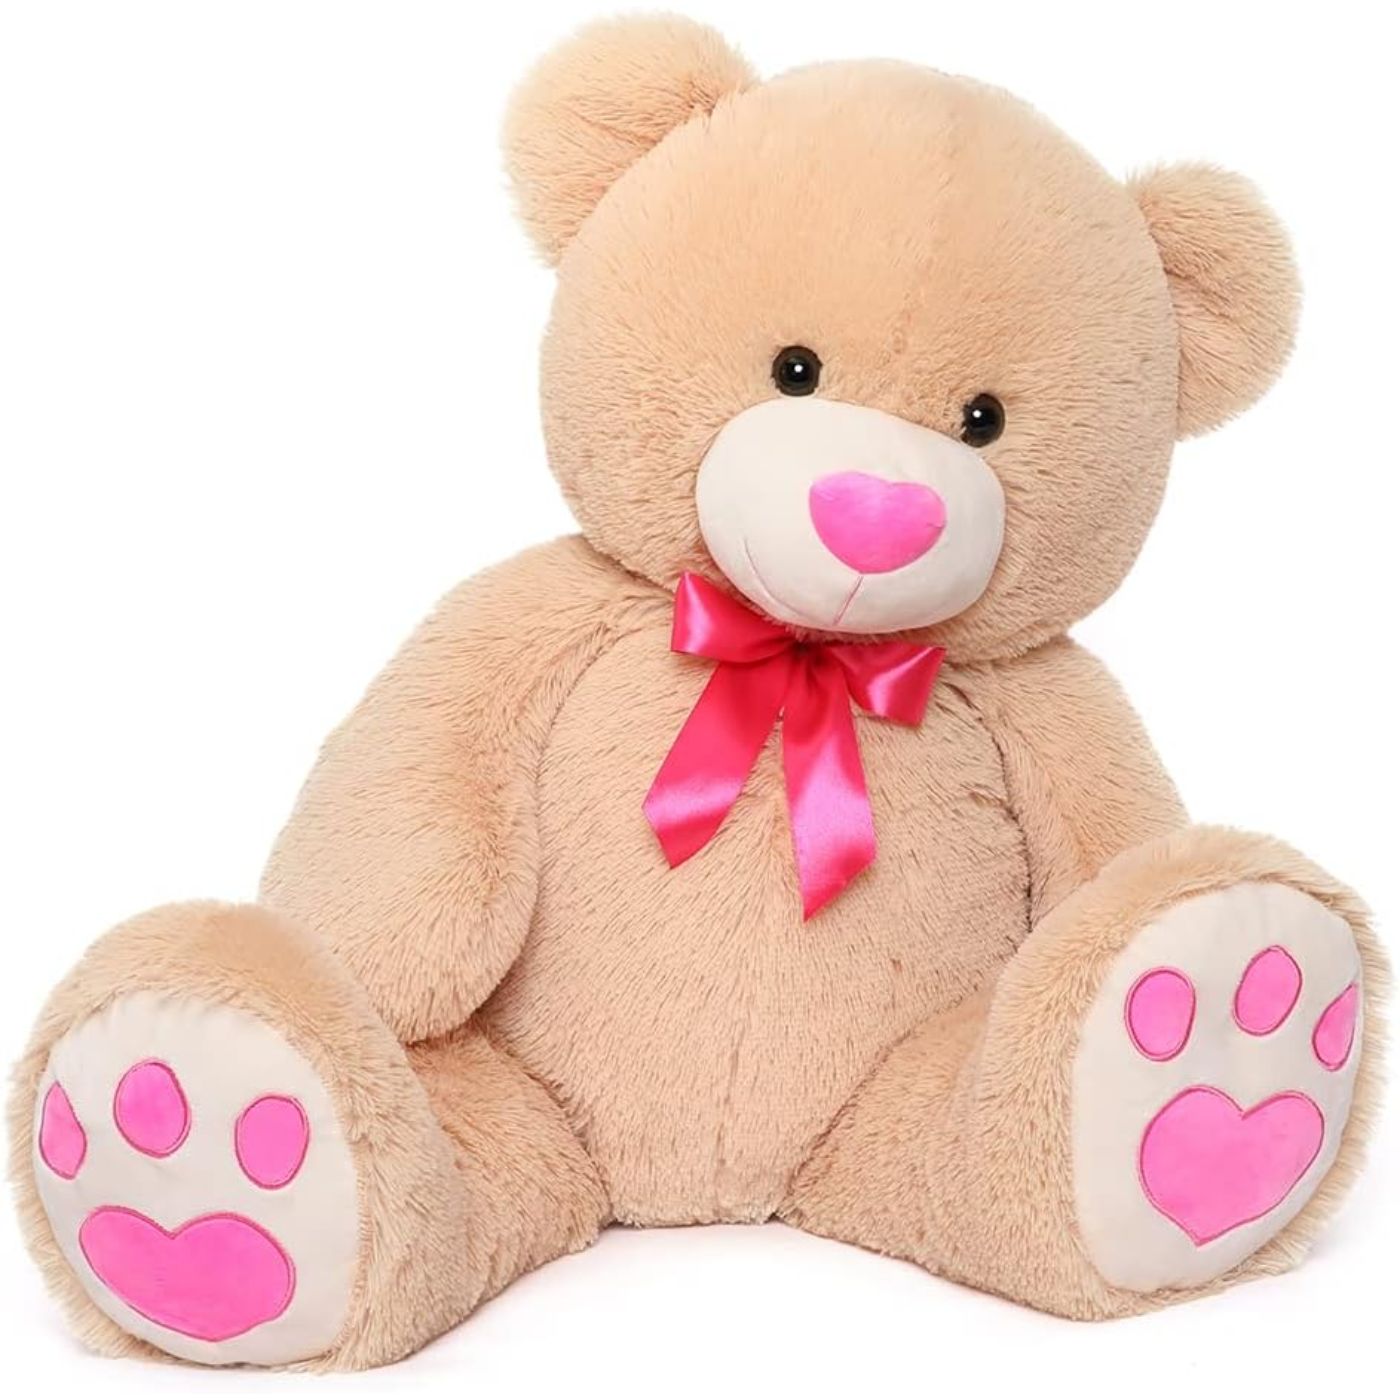 Giant Teddy Bear Stuffed Toy, Light Brown, 36 Inches